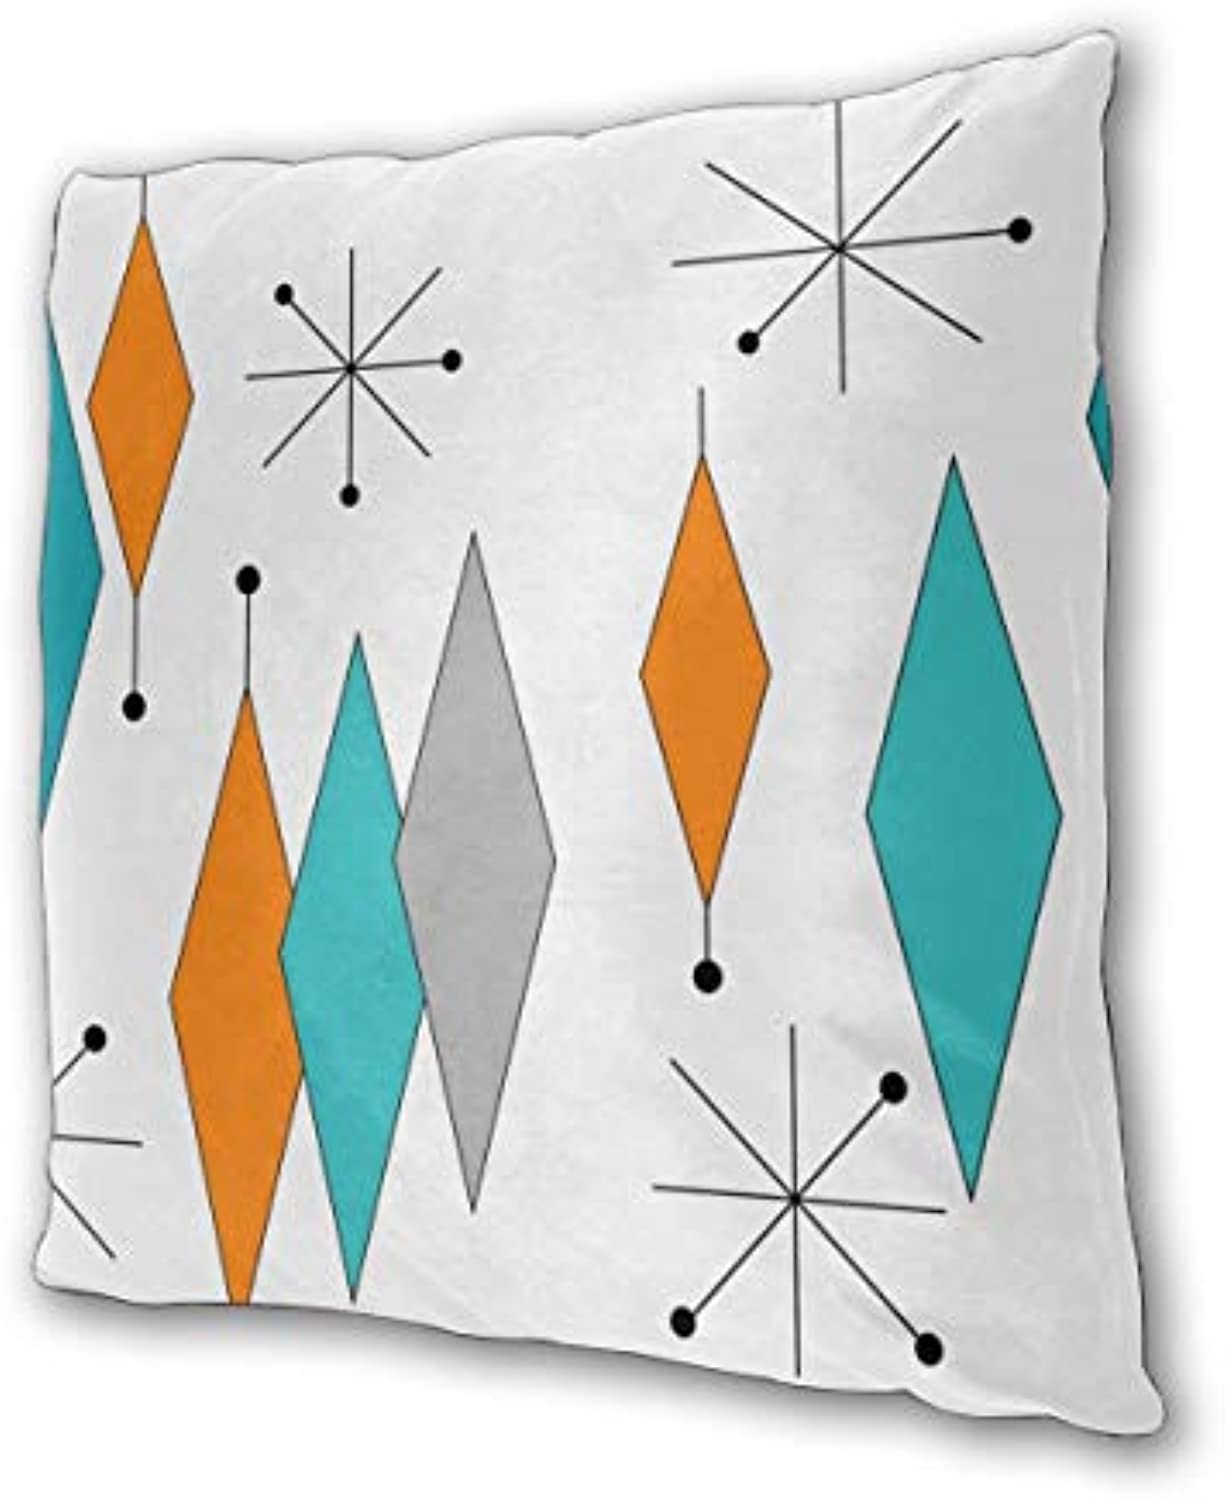 Wnoesat Turquoise Orange Diamond Pillow Covers Set of 2 Mid Century Throw Pillow Covers Retro Starburst Cushion Cover Modern Decorative Pillowcases for Sofa Bed Couch Chair 18 x 18